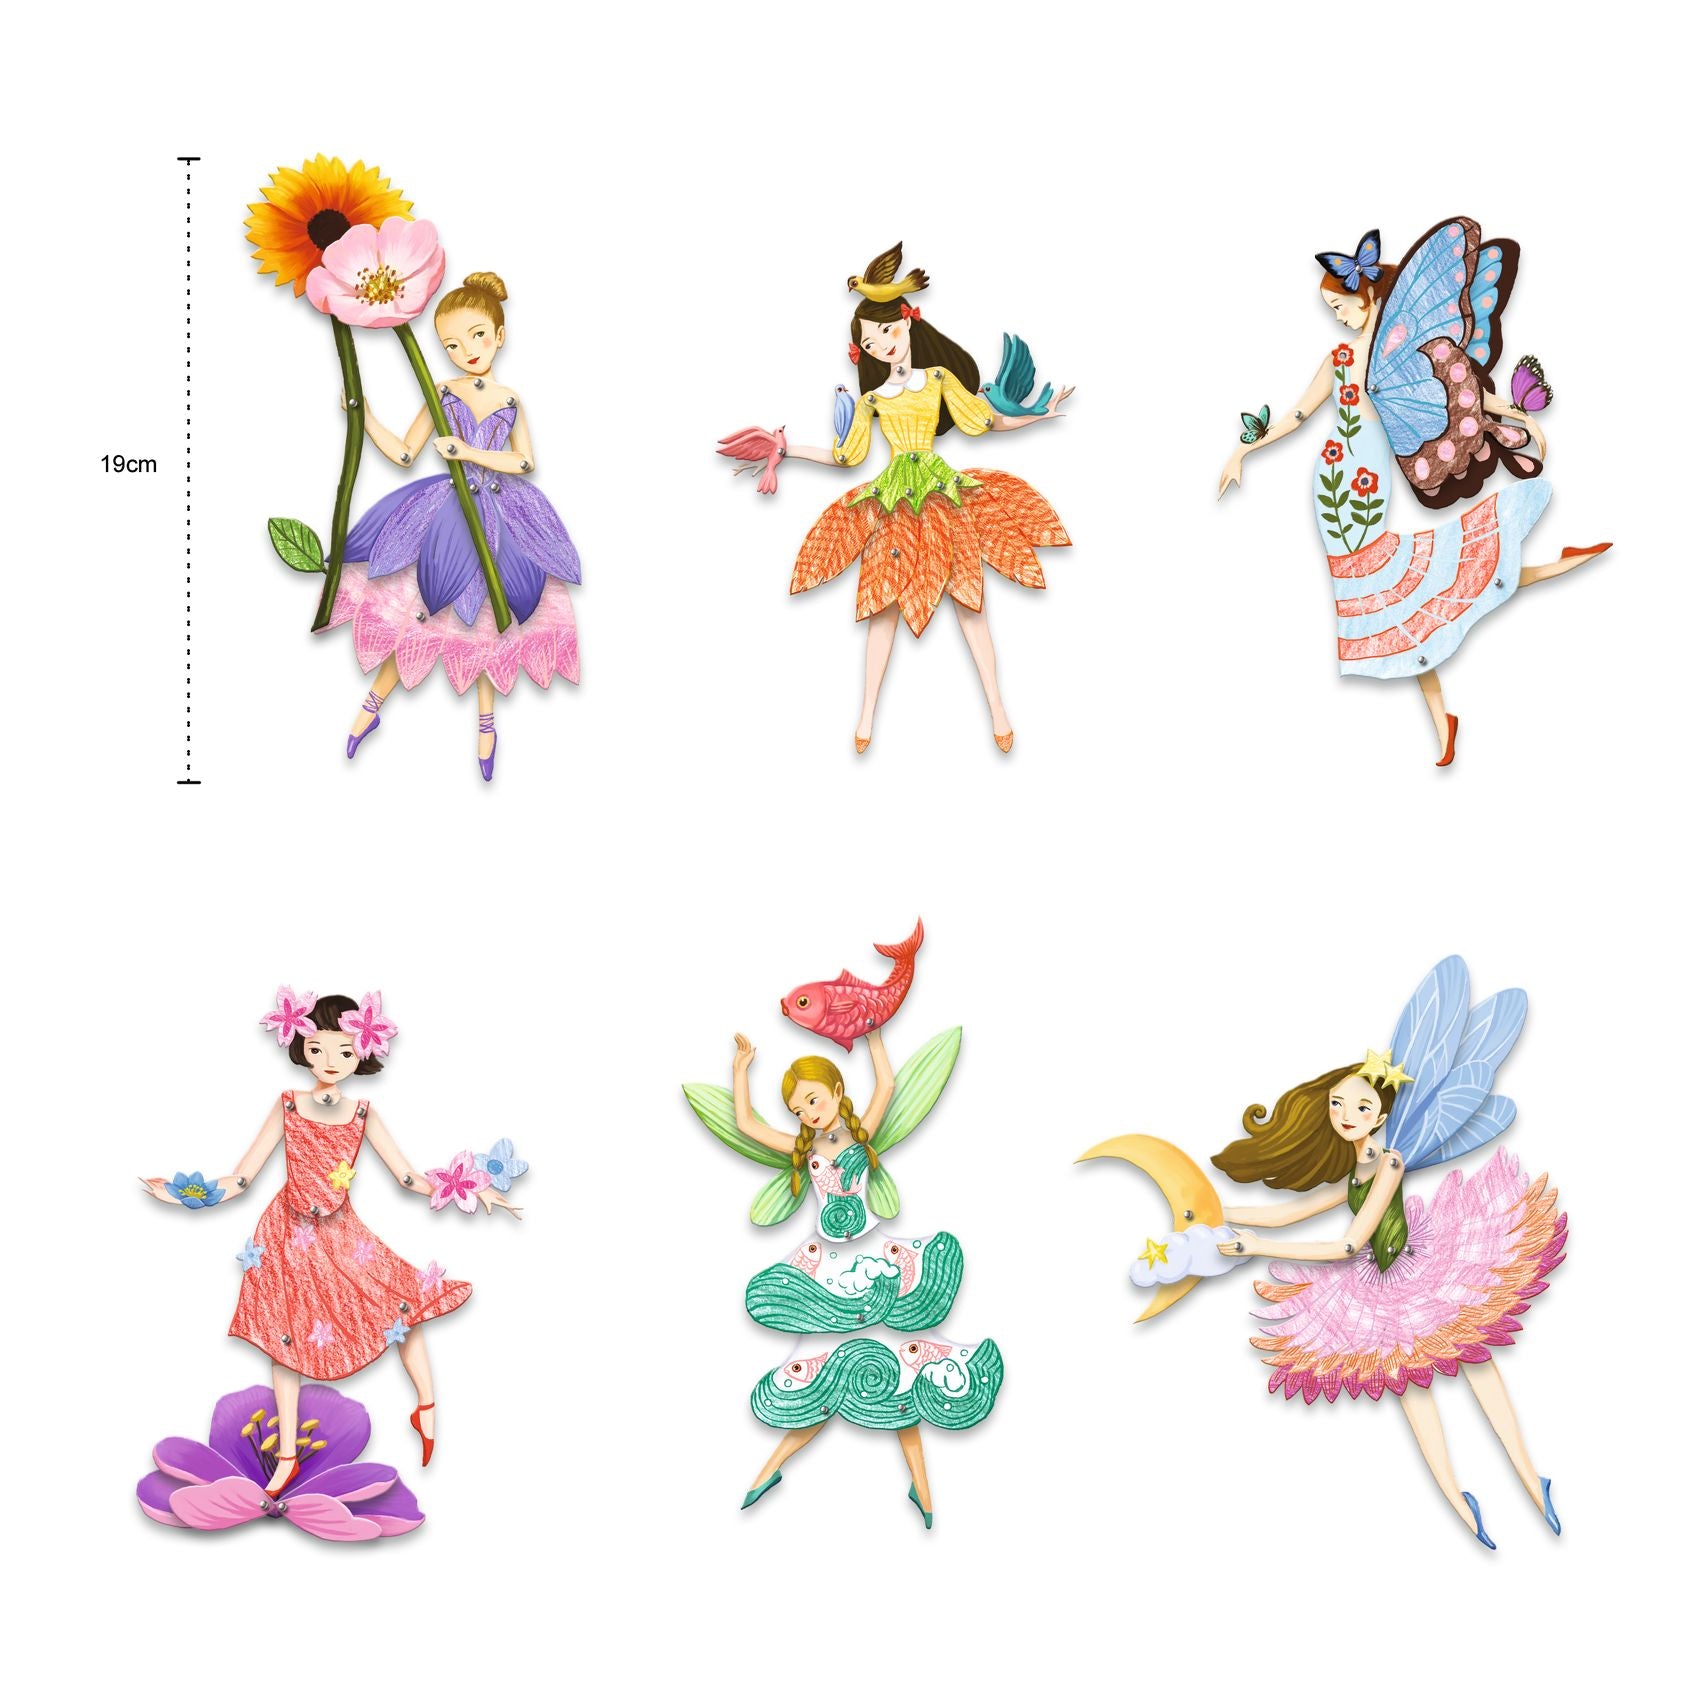 Djeco Jumping Jacks – Fairies Paper Puppets